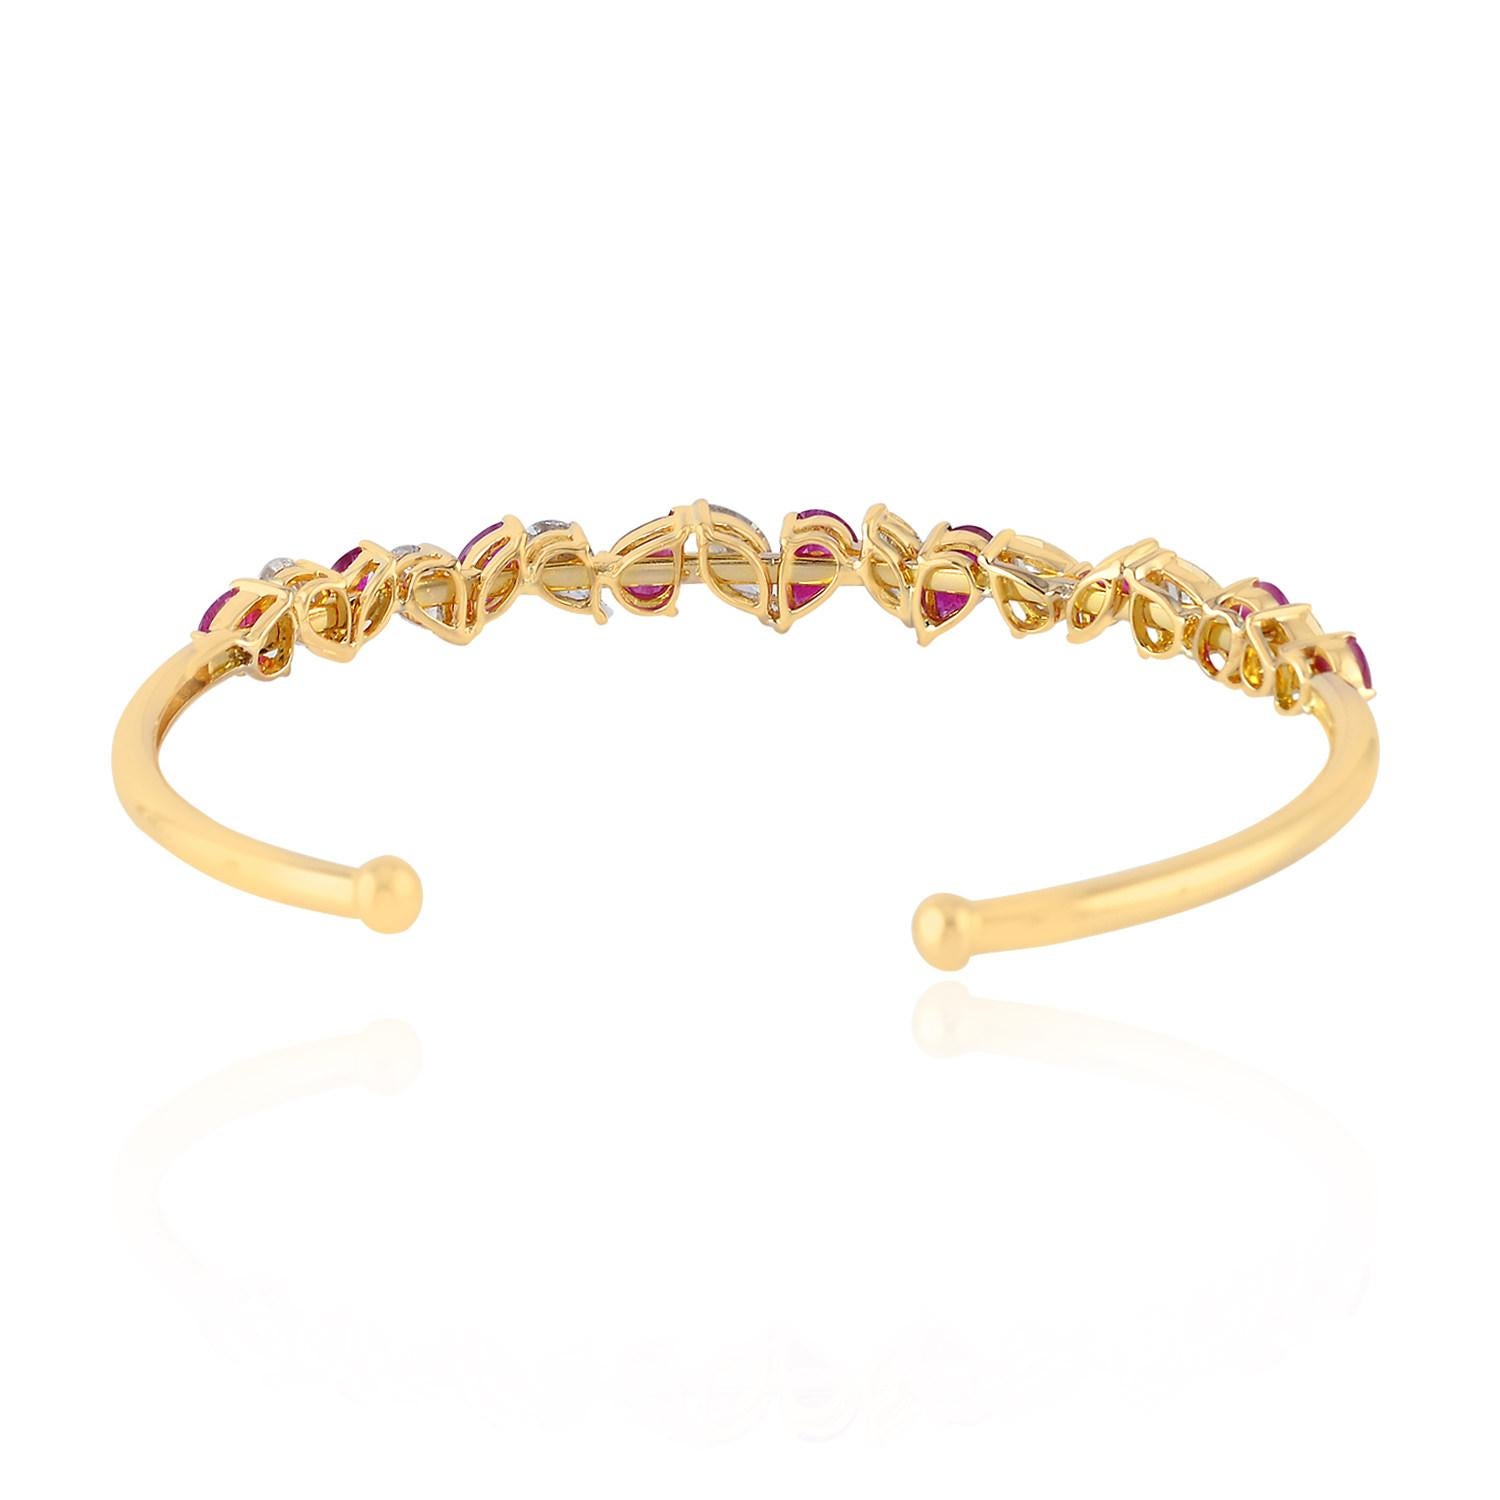 
Sweet and sassy Ruby Diamond pear and marquee shape Bangle in 18K Yellow Gold is perfect to stack and add some vibrant colors to your wrist.

18KT Gold: 9.382gms
Diamond: 2.33cts
Ruby: 3.099cts
